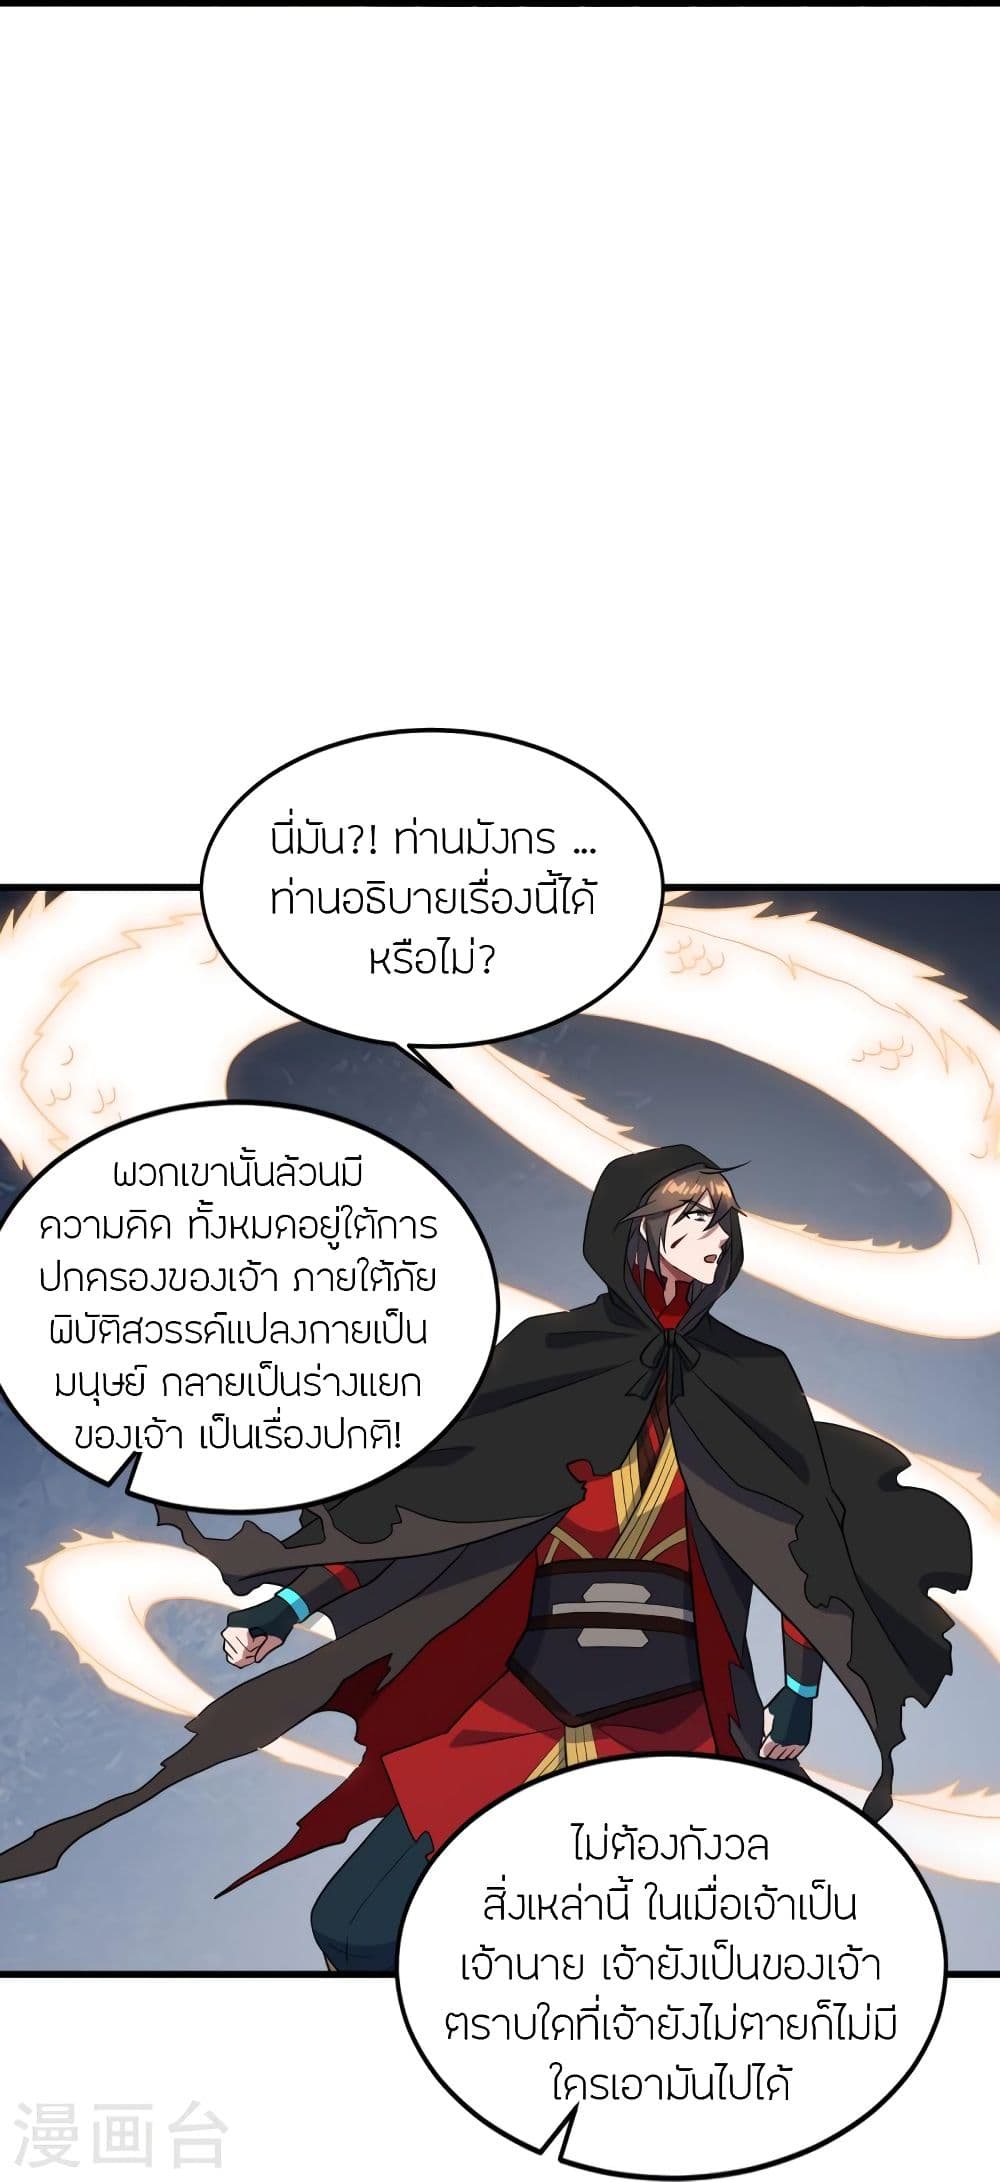 Banished Disciple's Counterattack เธเธฑเธเธฃเธเธฃเธฃเธ”เธดเน€เธเธตเธขเธเธขเธธเธ—เธ 304 (78)